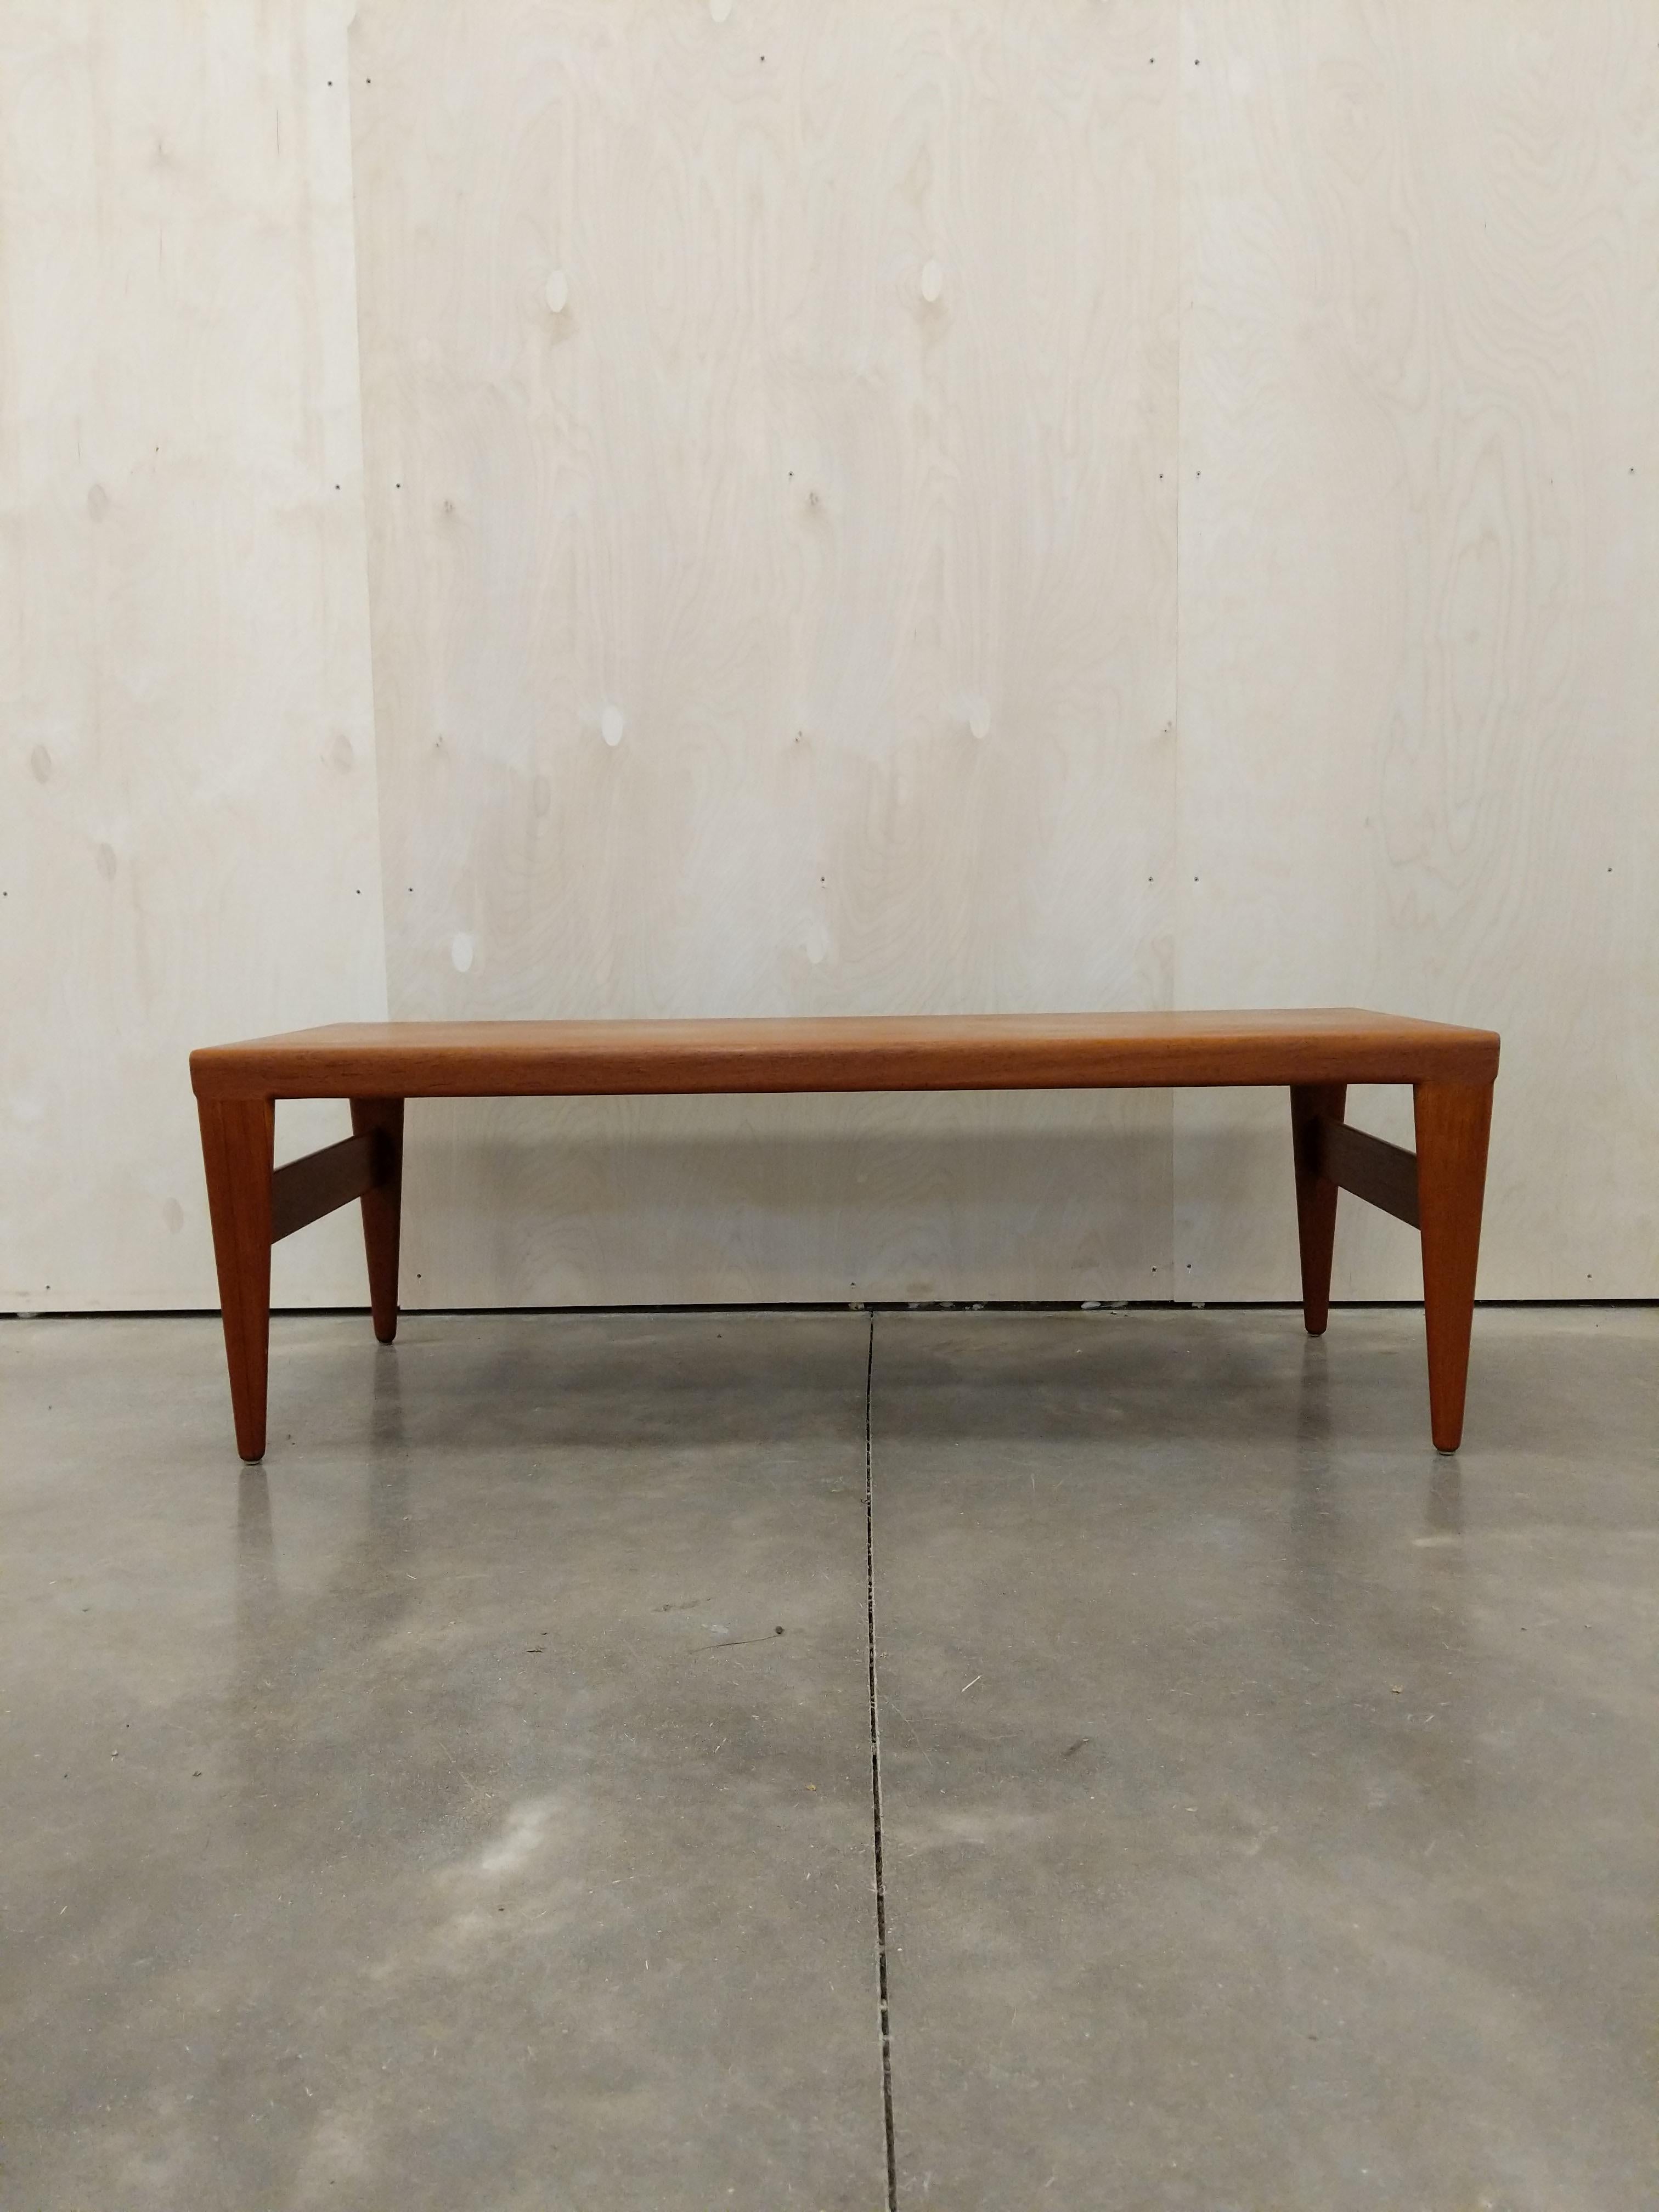 Authentic vintage mid century Danish / Scandinavian Modern extendable teak coffee table.

With pull-out surfaces on both ends.

